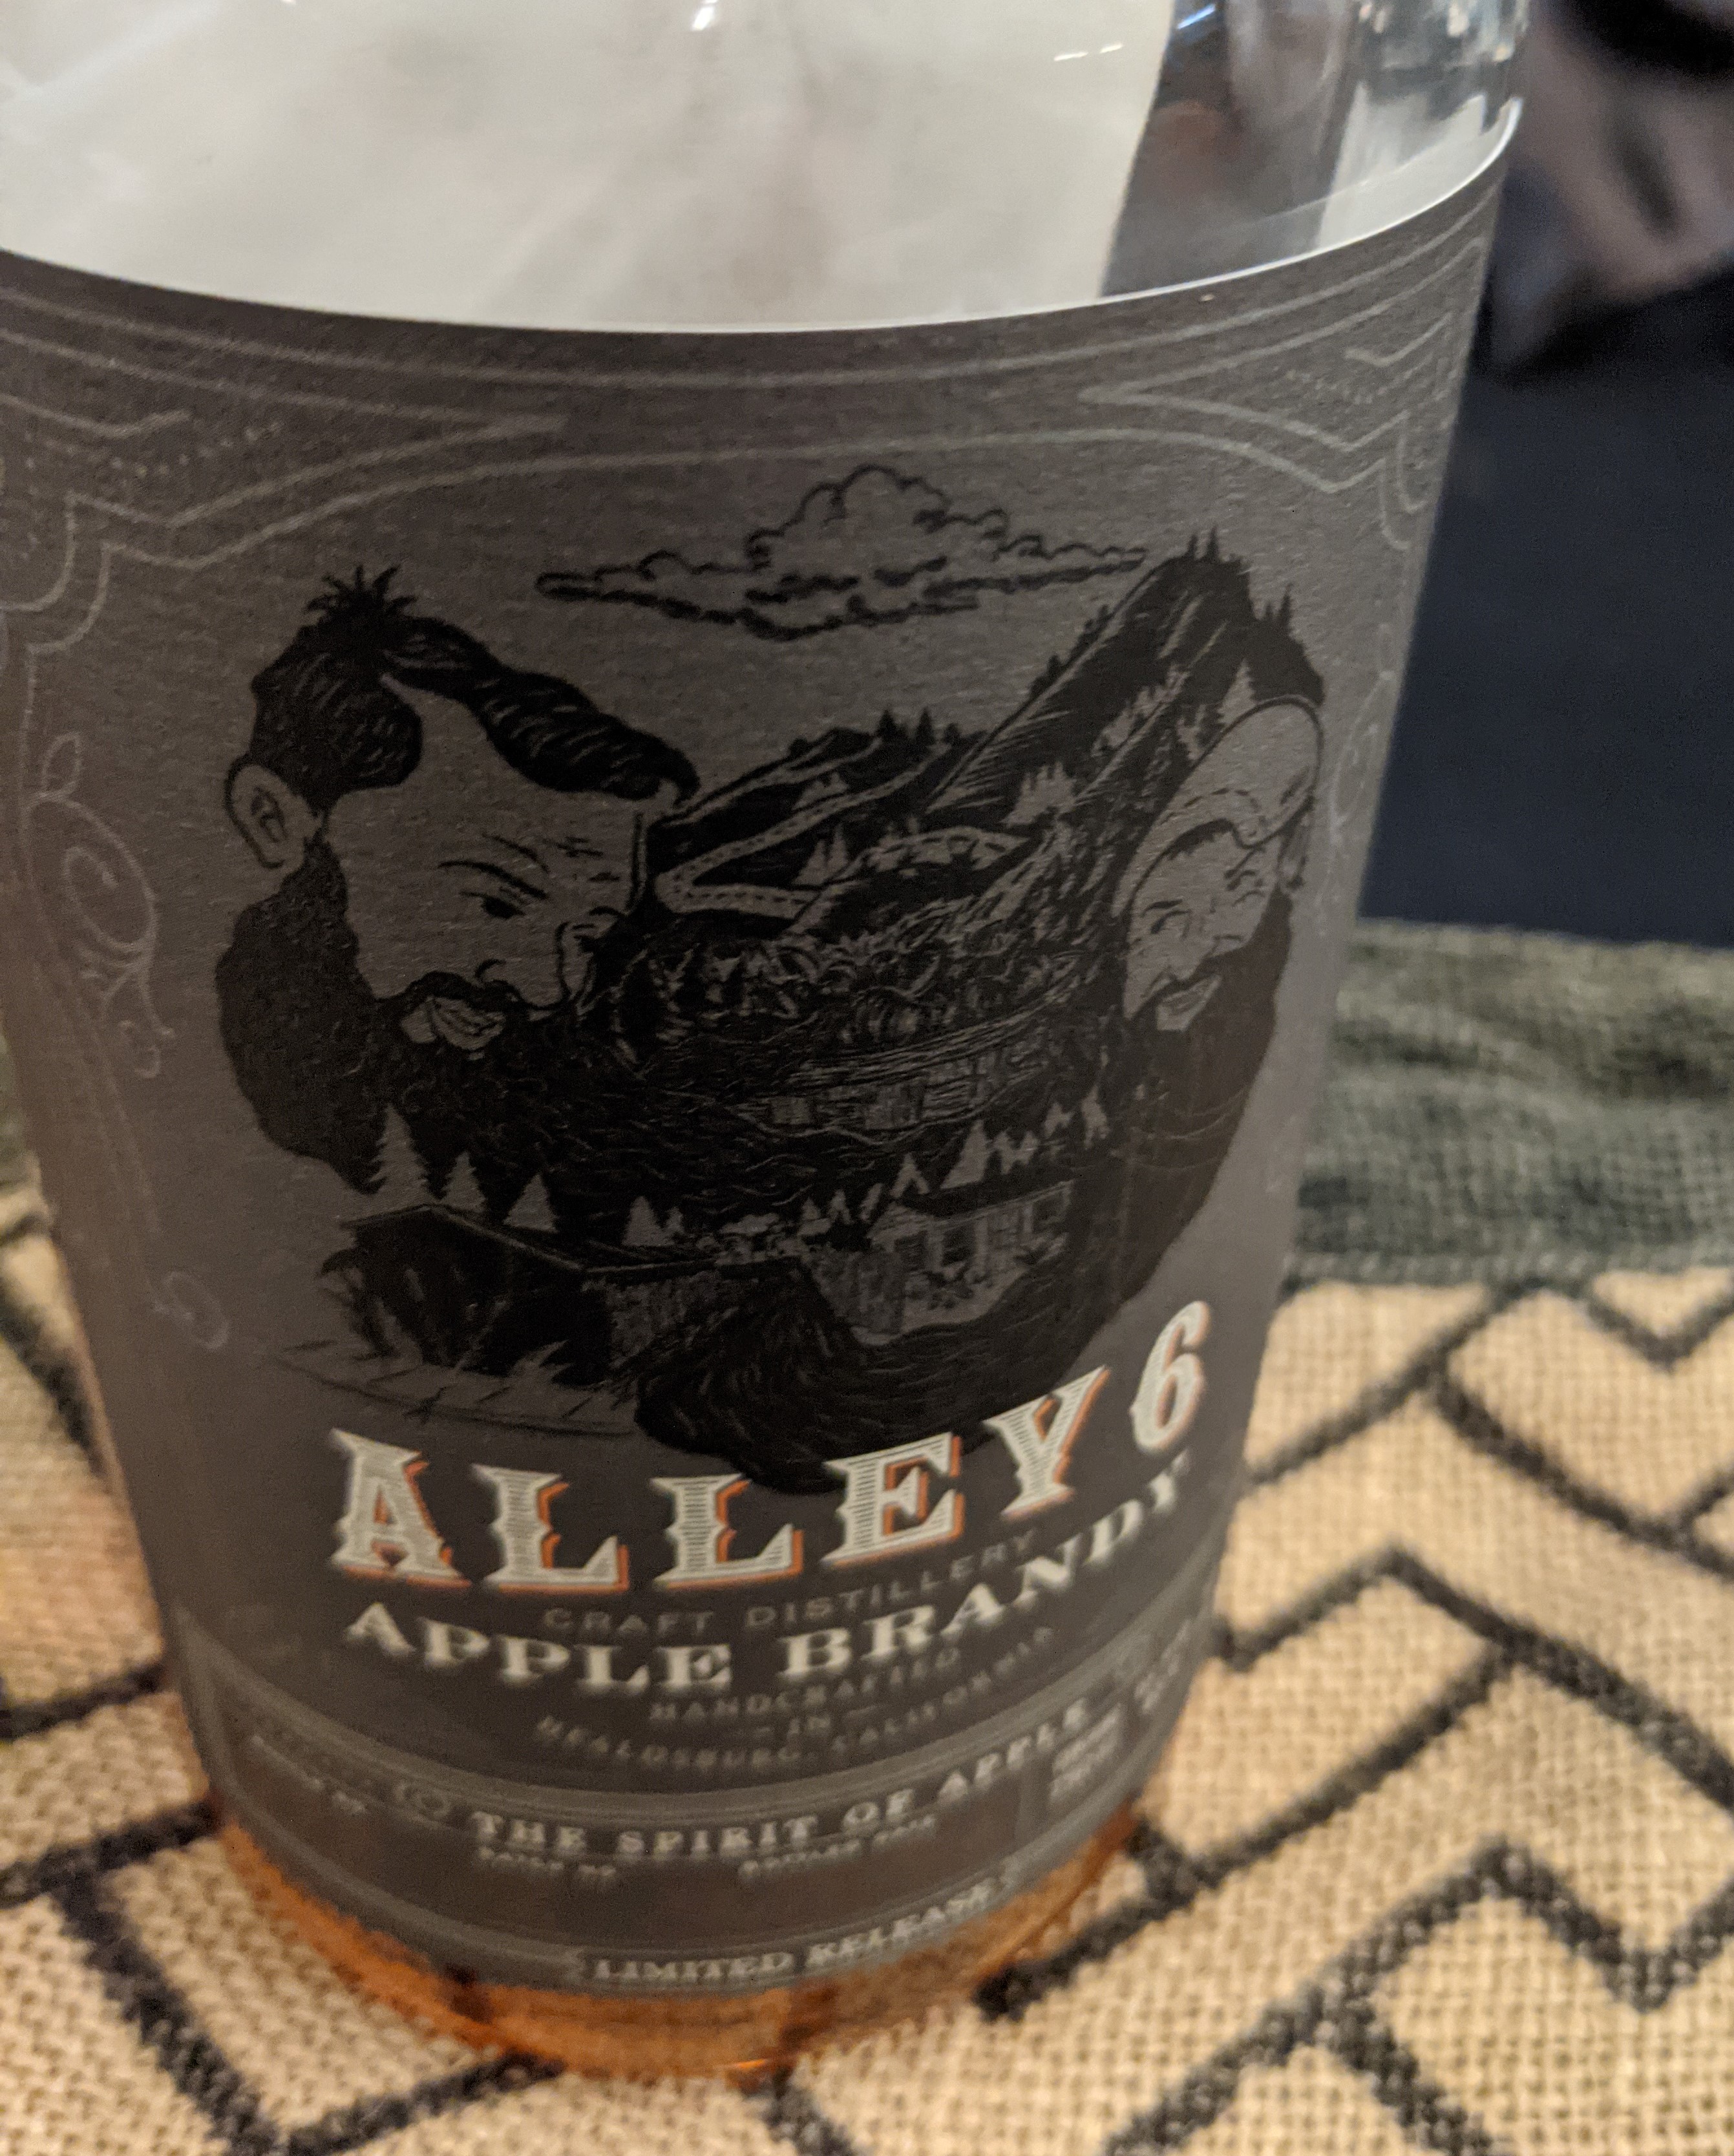 Image of Alley 6 Apple Brandy